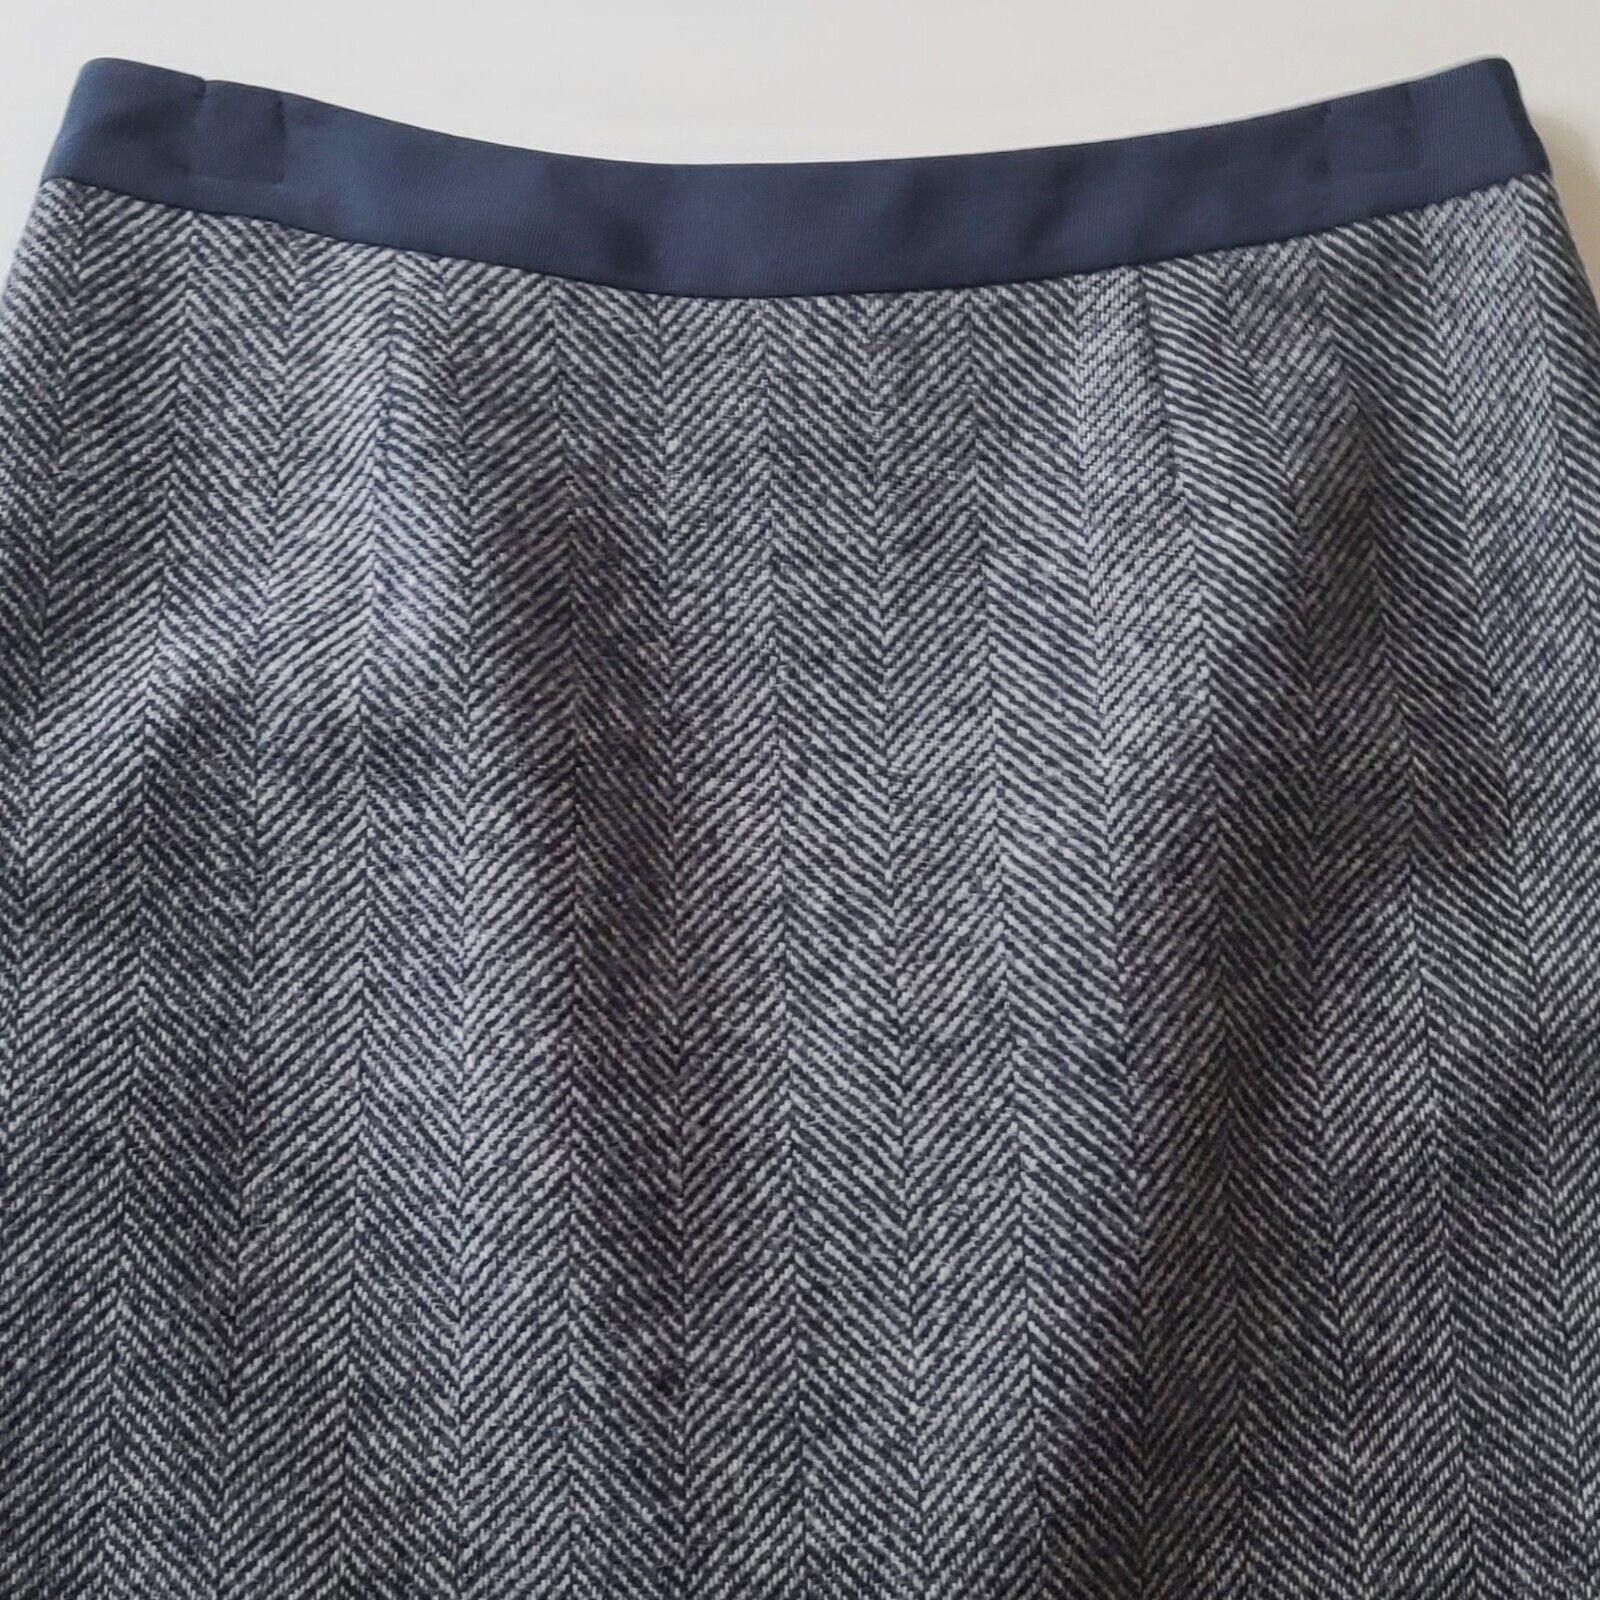 Boden British Tweed by Moon Skirt 2R Navy Blue Wo… - image 6